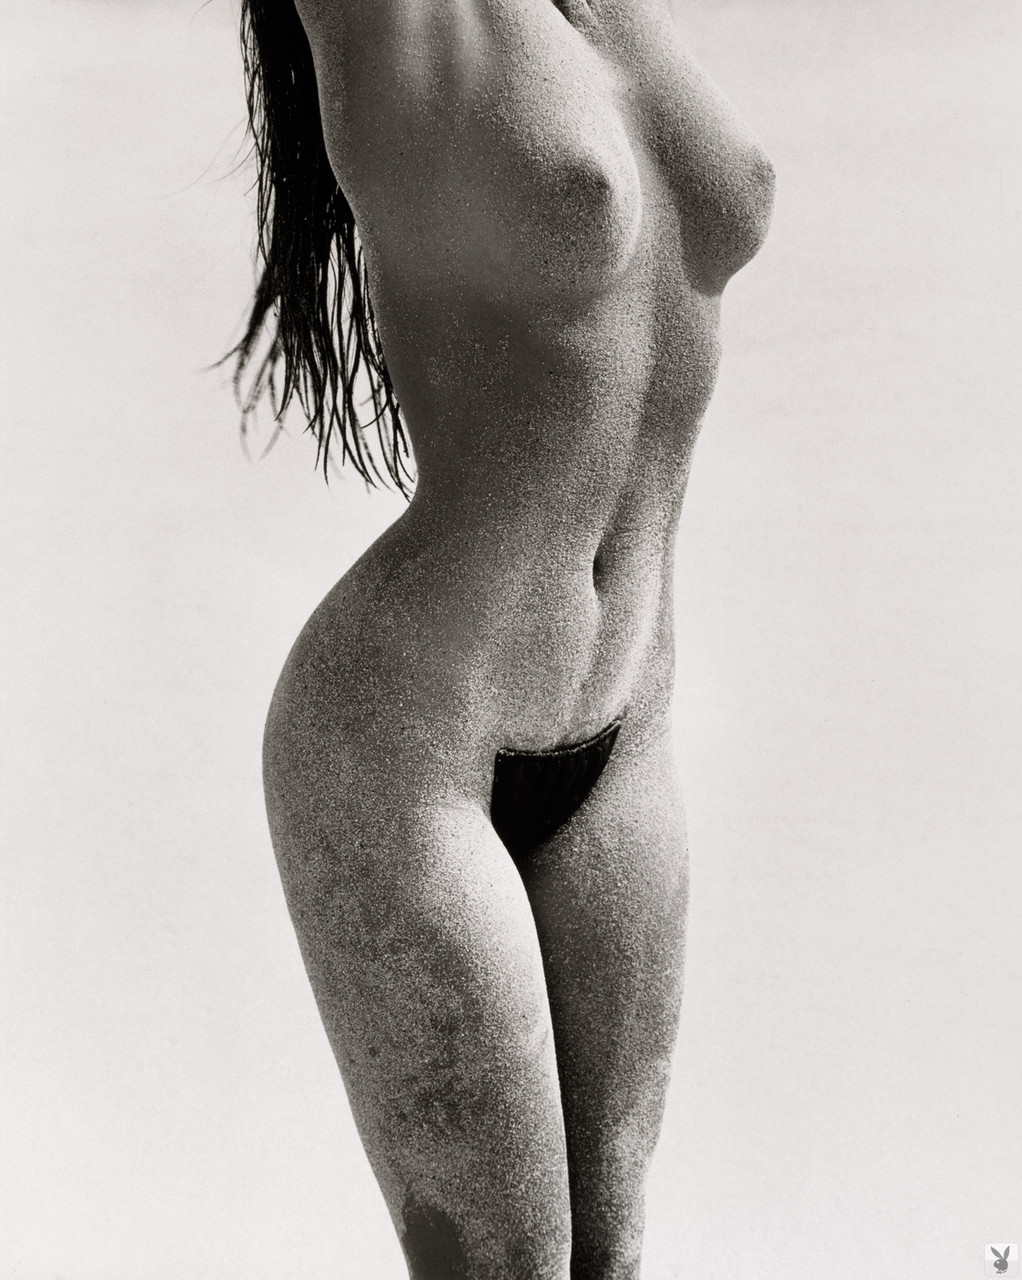 Sexy celebrity Cindy Crawford posing naked for the black and white photo shoot photo porno #423810475 | Playboy Plus Pics, Cindy Crawford, Centerfold, porno mobile